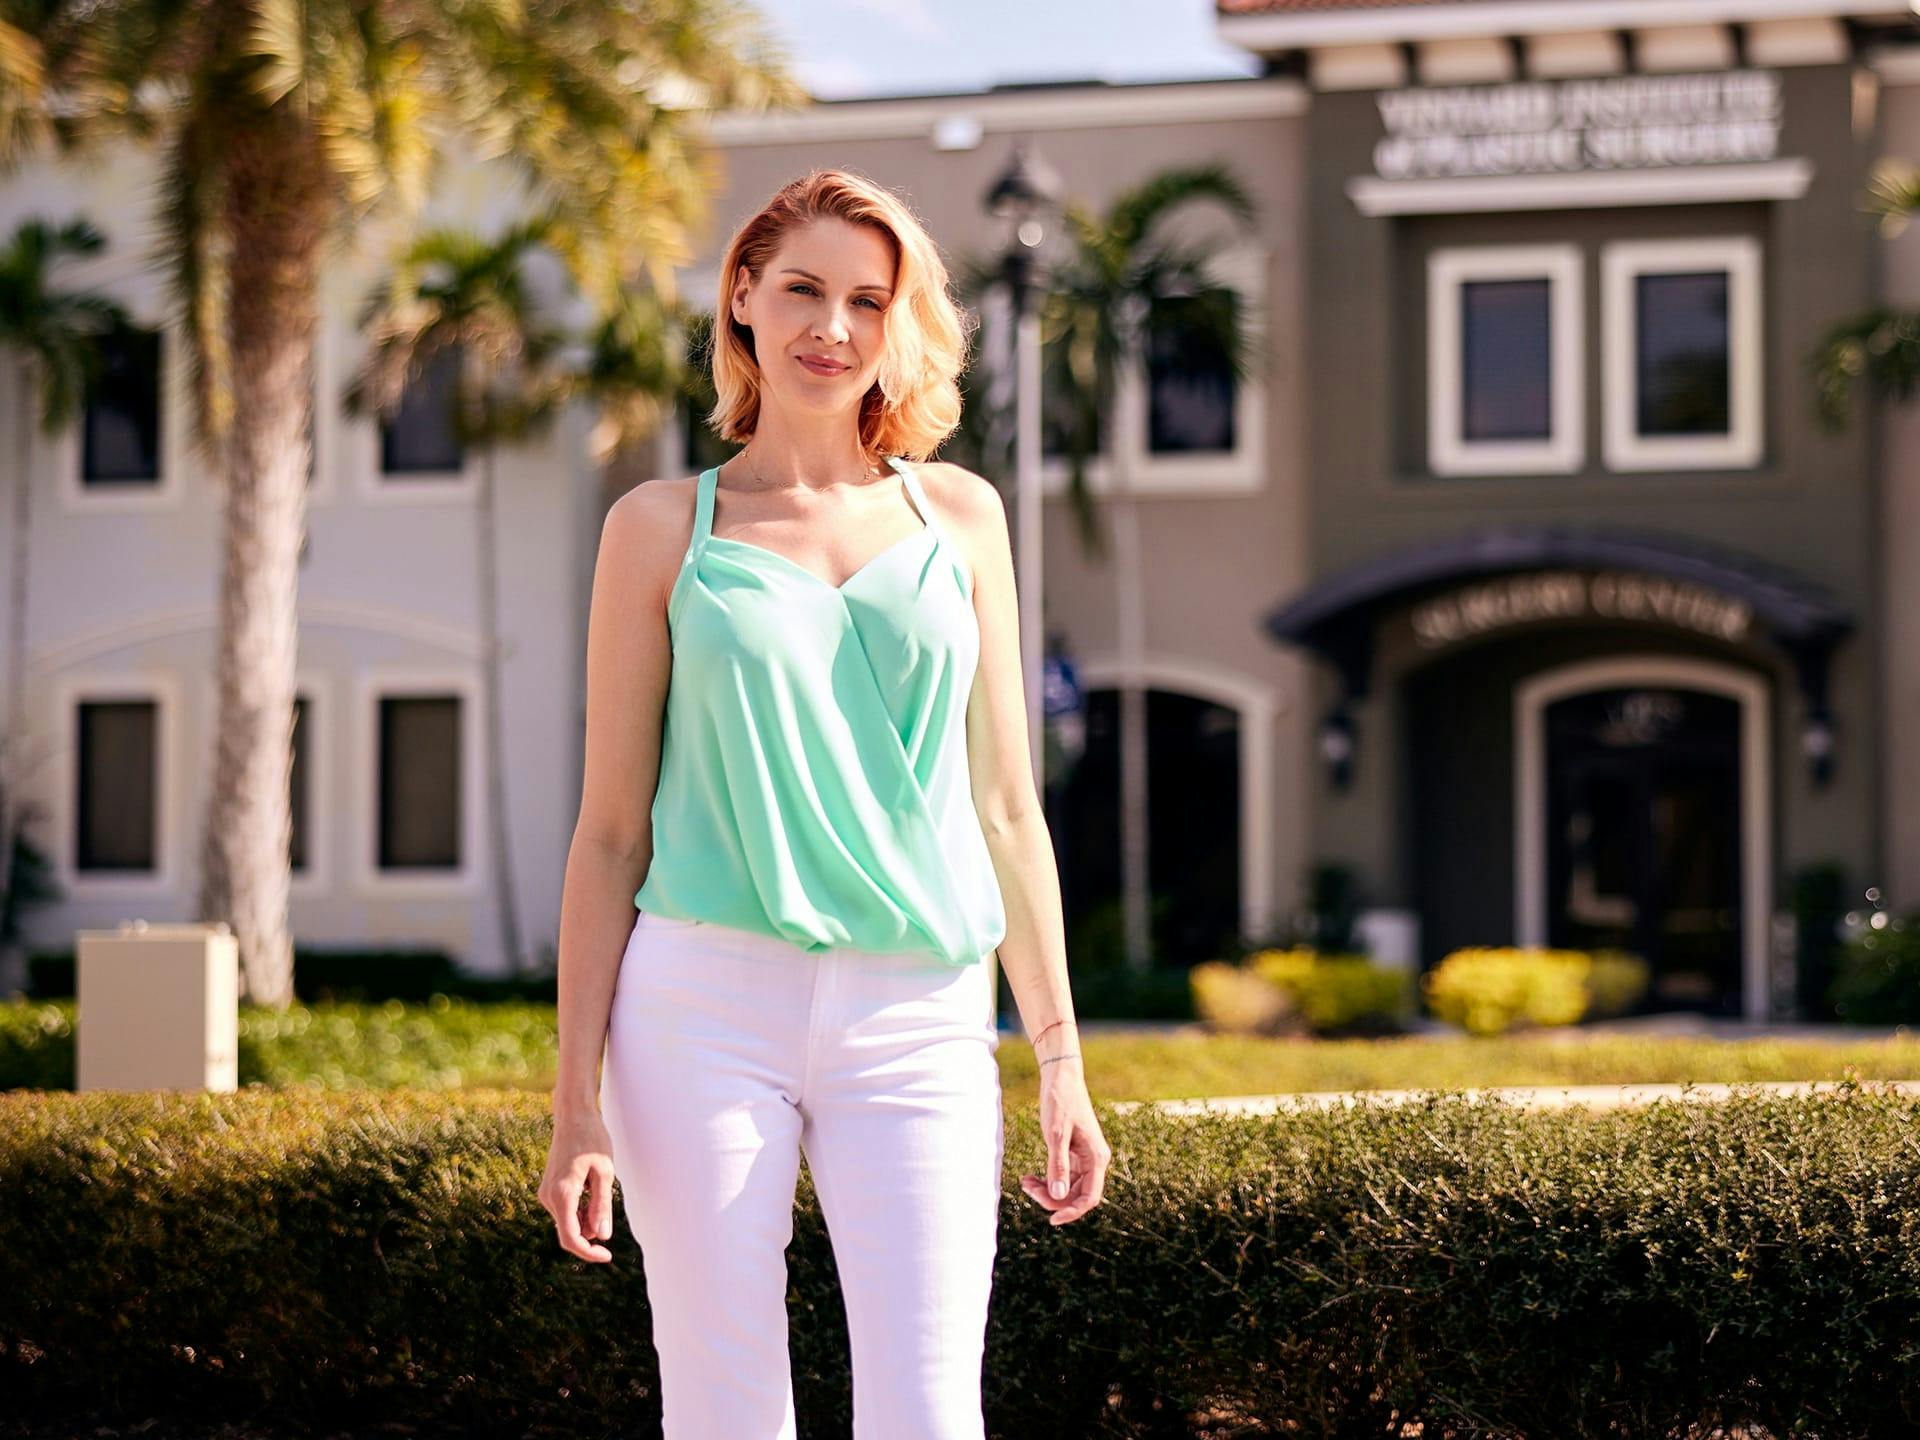 Woman wearing mint green top and white pants